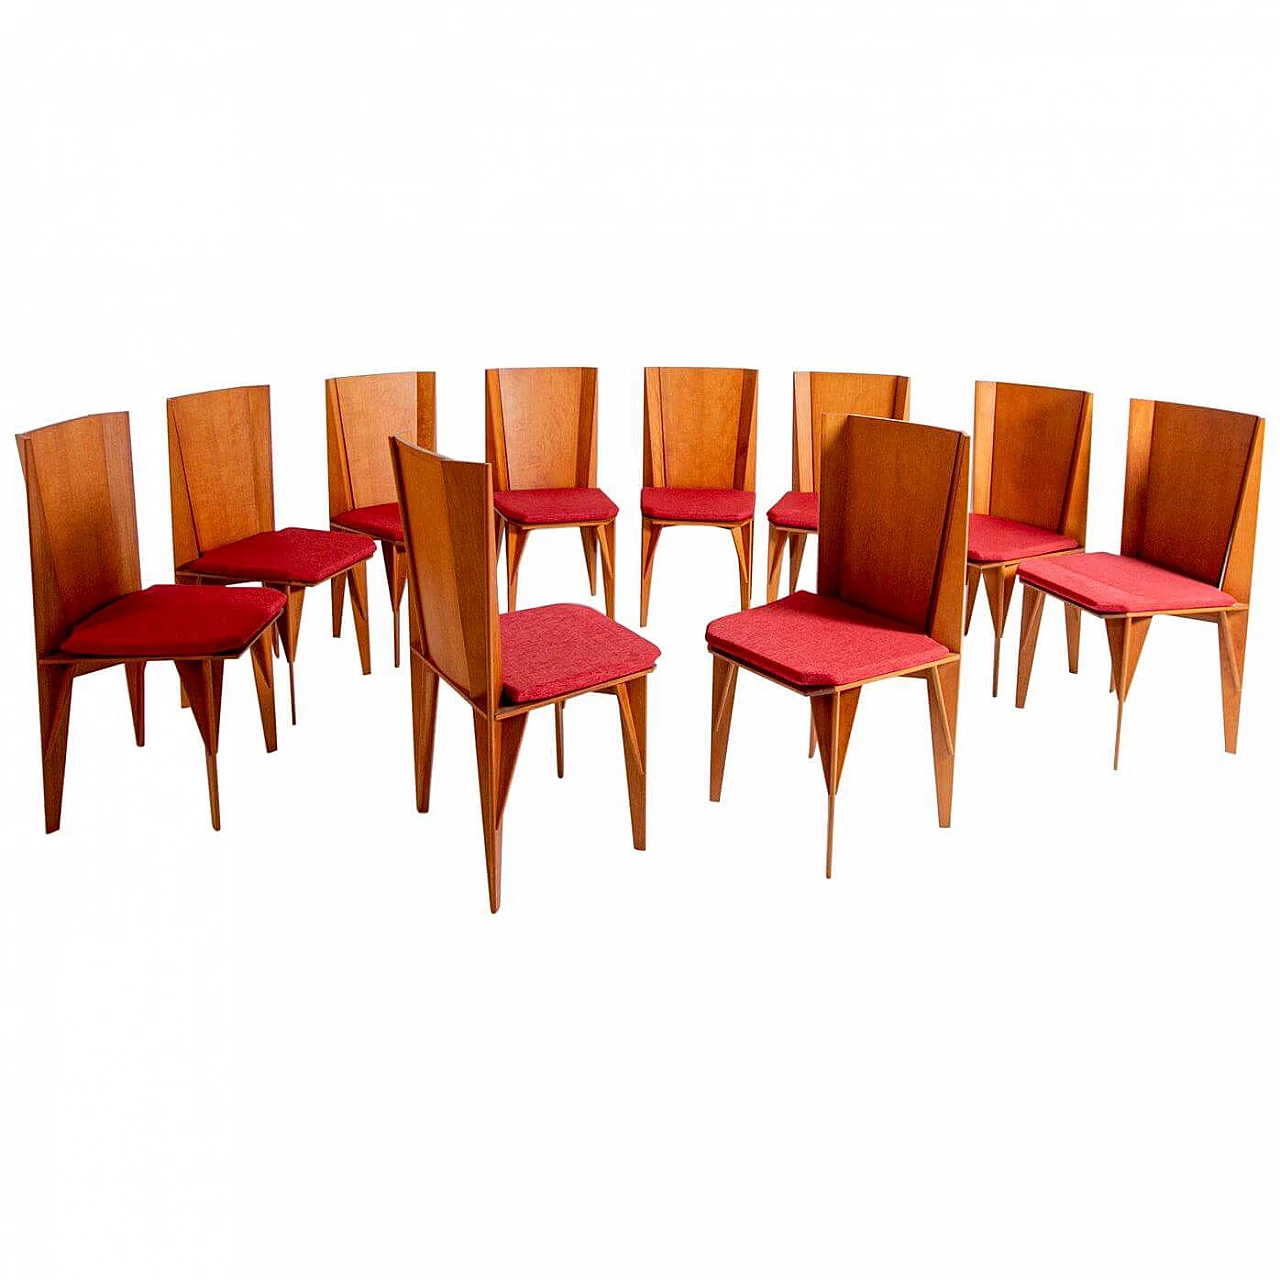 10 Matrix chairs by Adriano & Paolo Suman for Giorgetti, 1980s 1406242